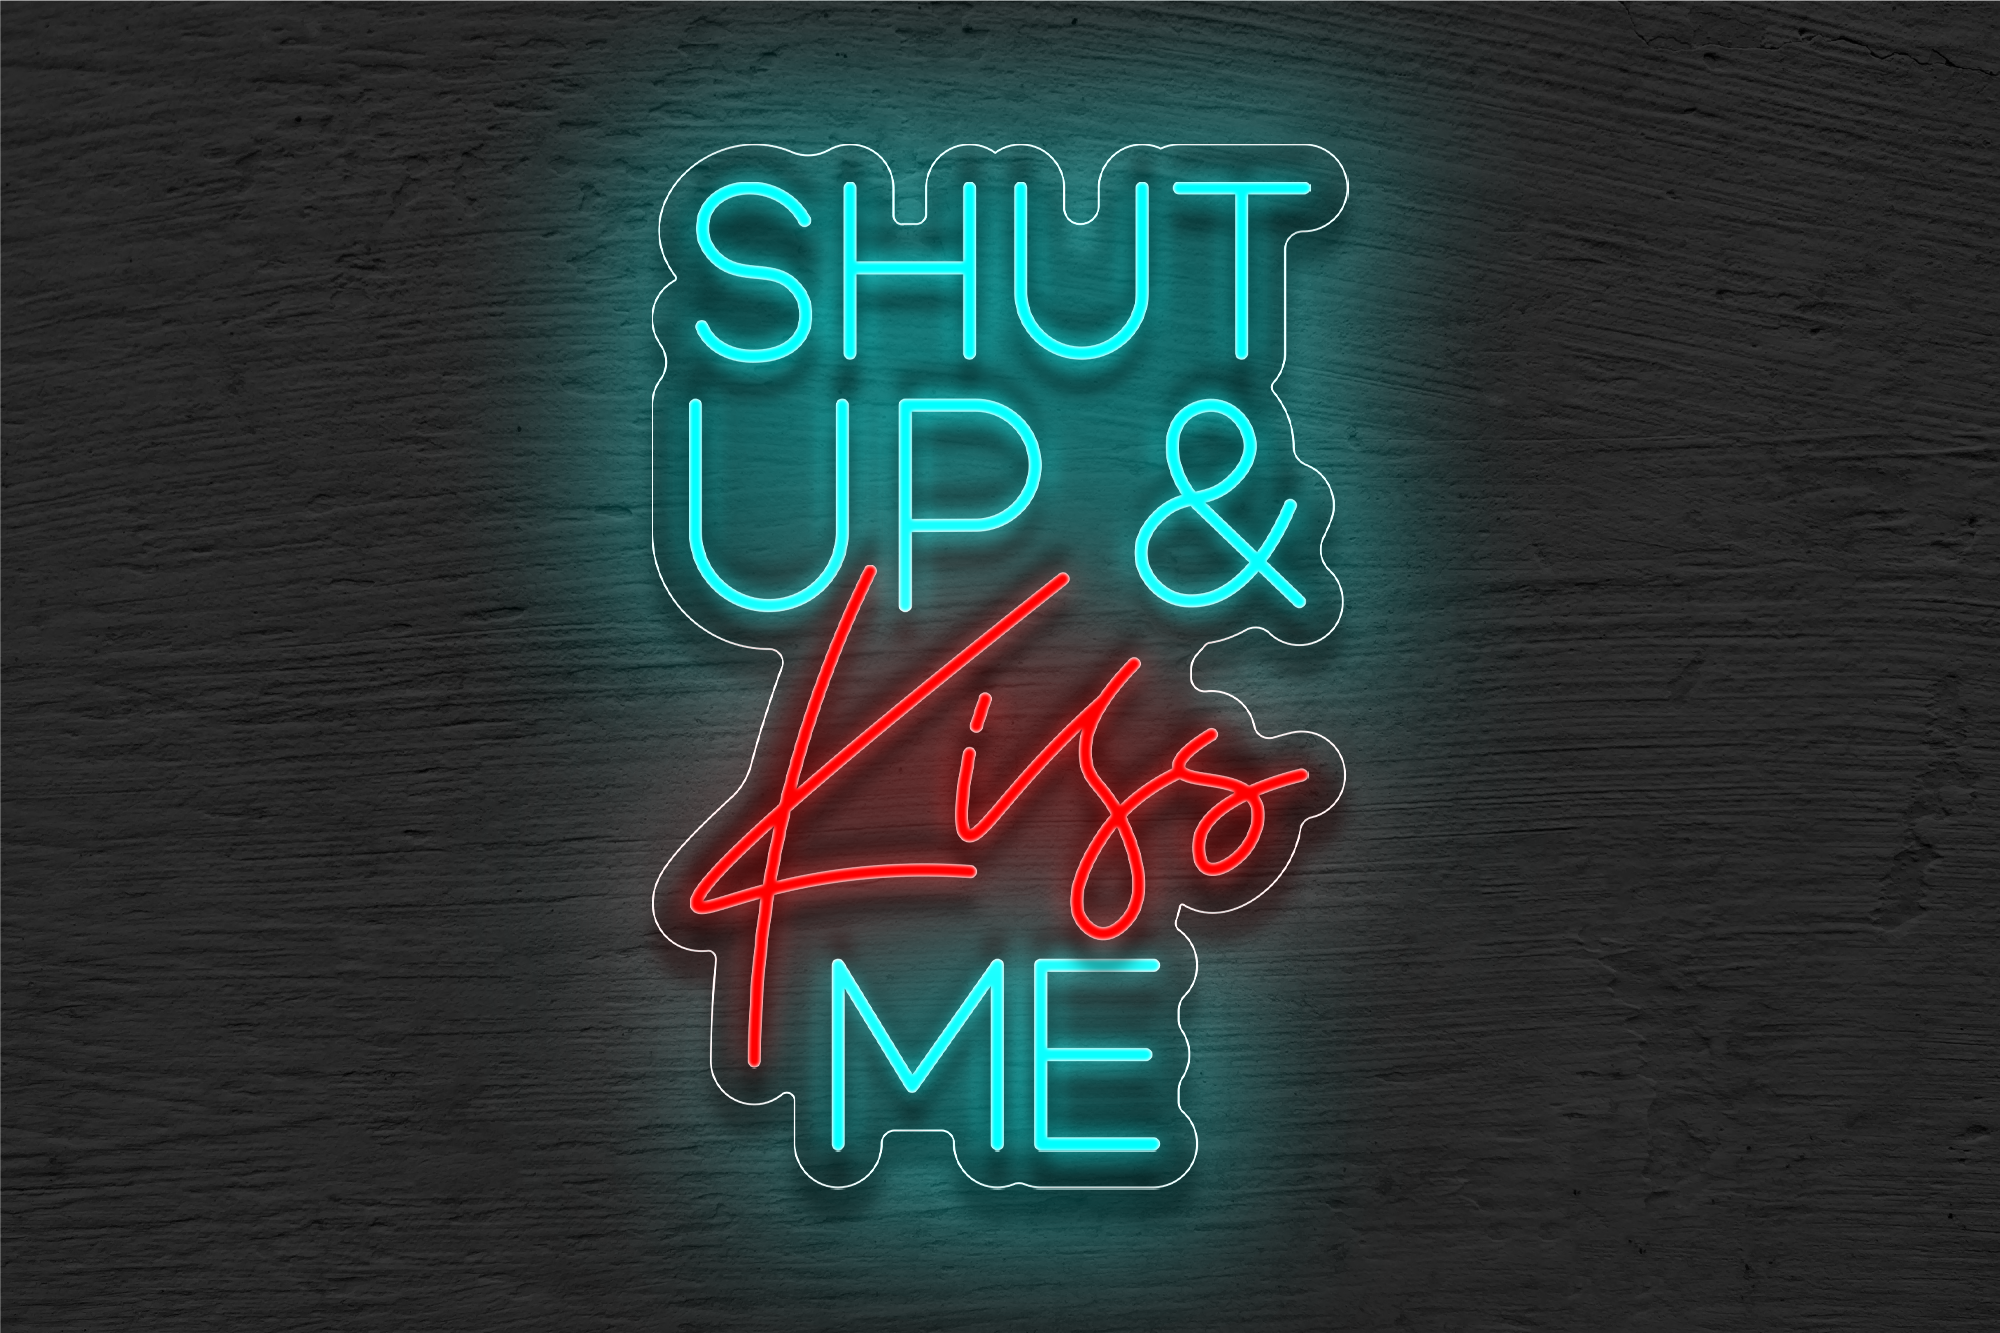 "Shut Up and Kiss me" LED Neon Sign